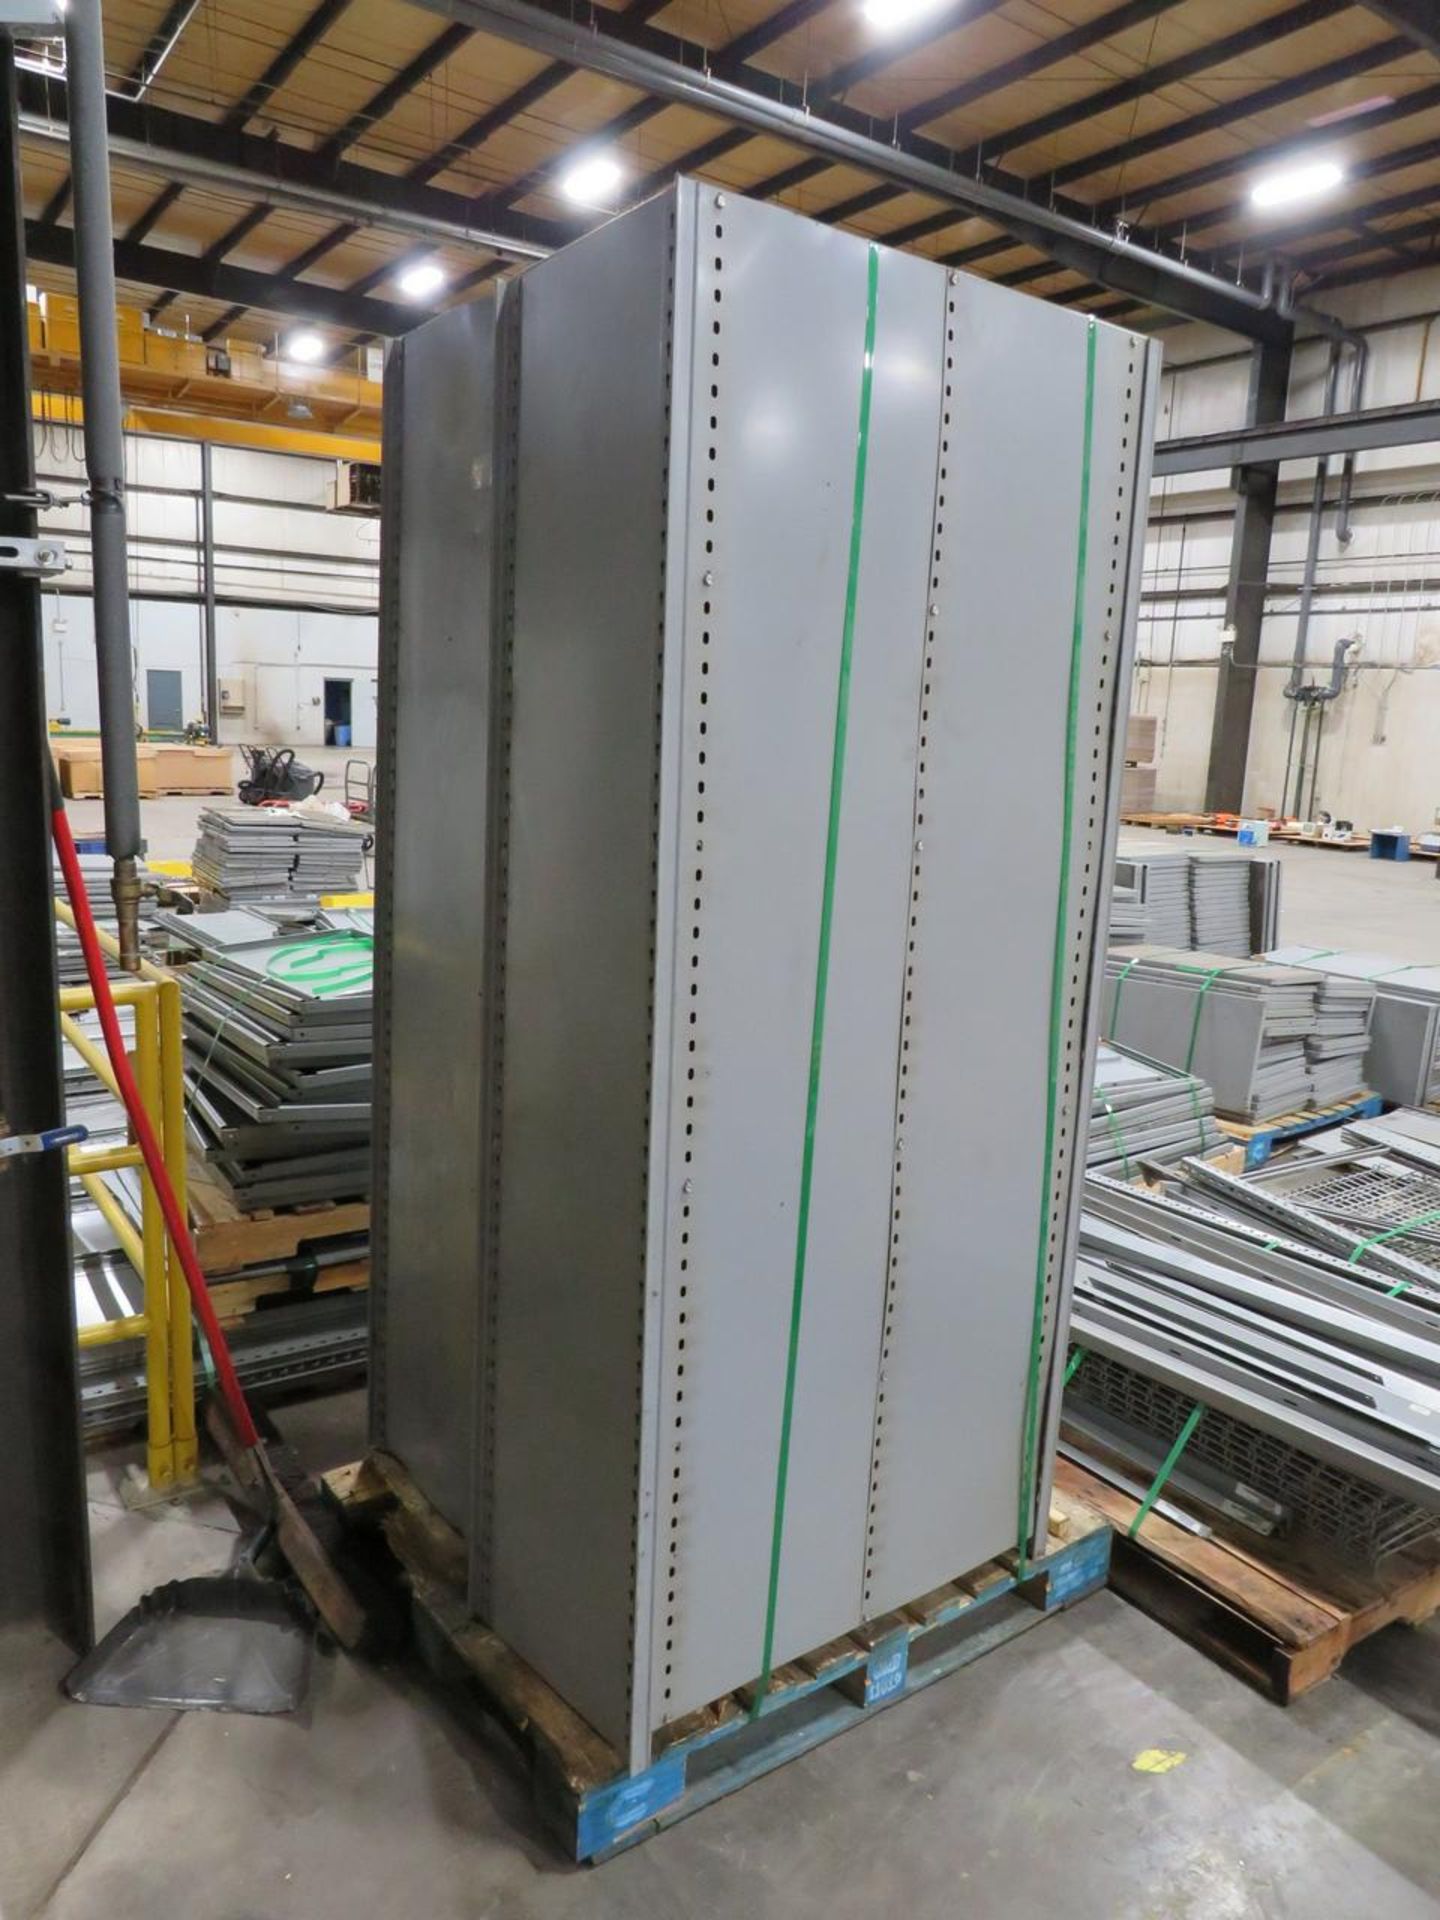 Lot of Disassembled Steel Storage Cabinets - Image 8 of 13